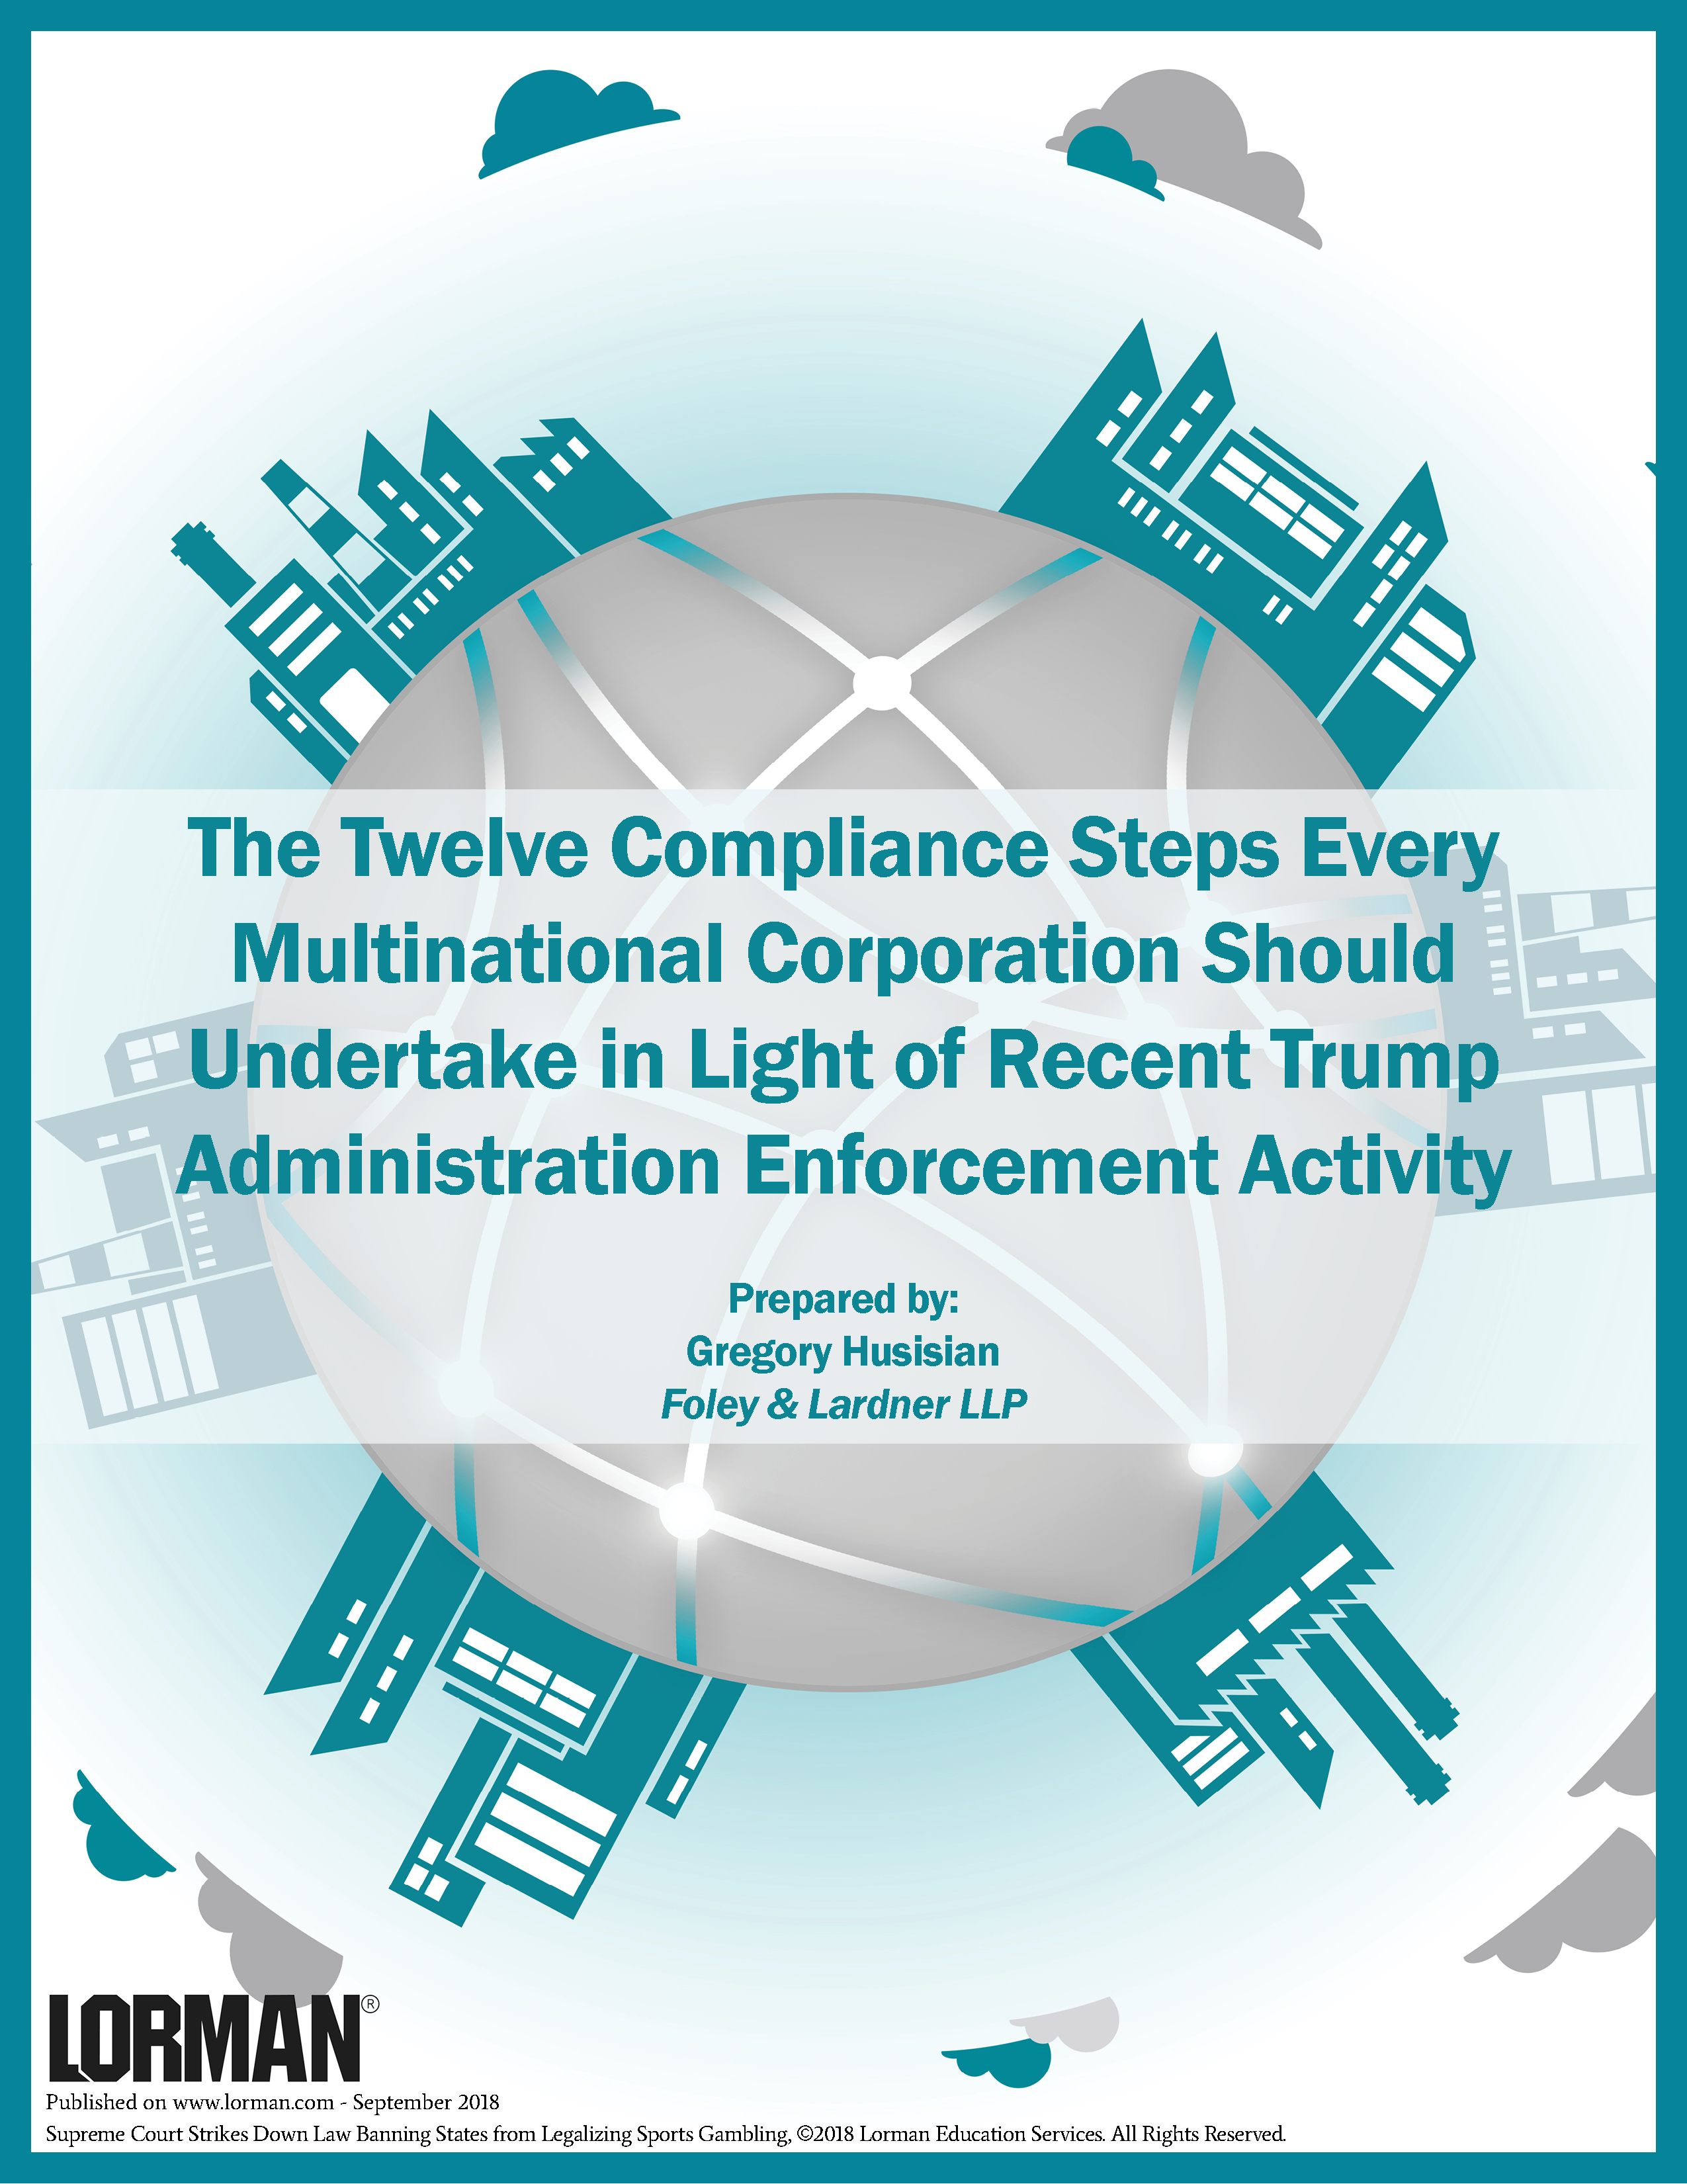 Compliance Steps Every Multinational Corporation Should Take in Light of Recent Enforcement Activity